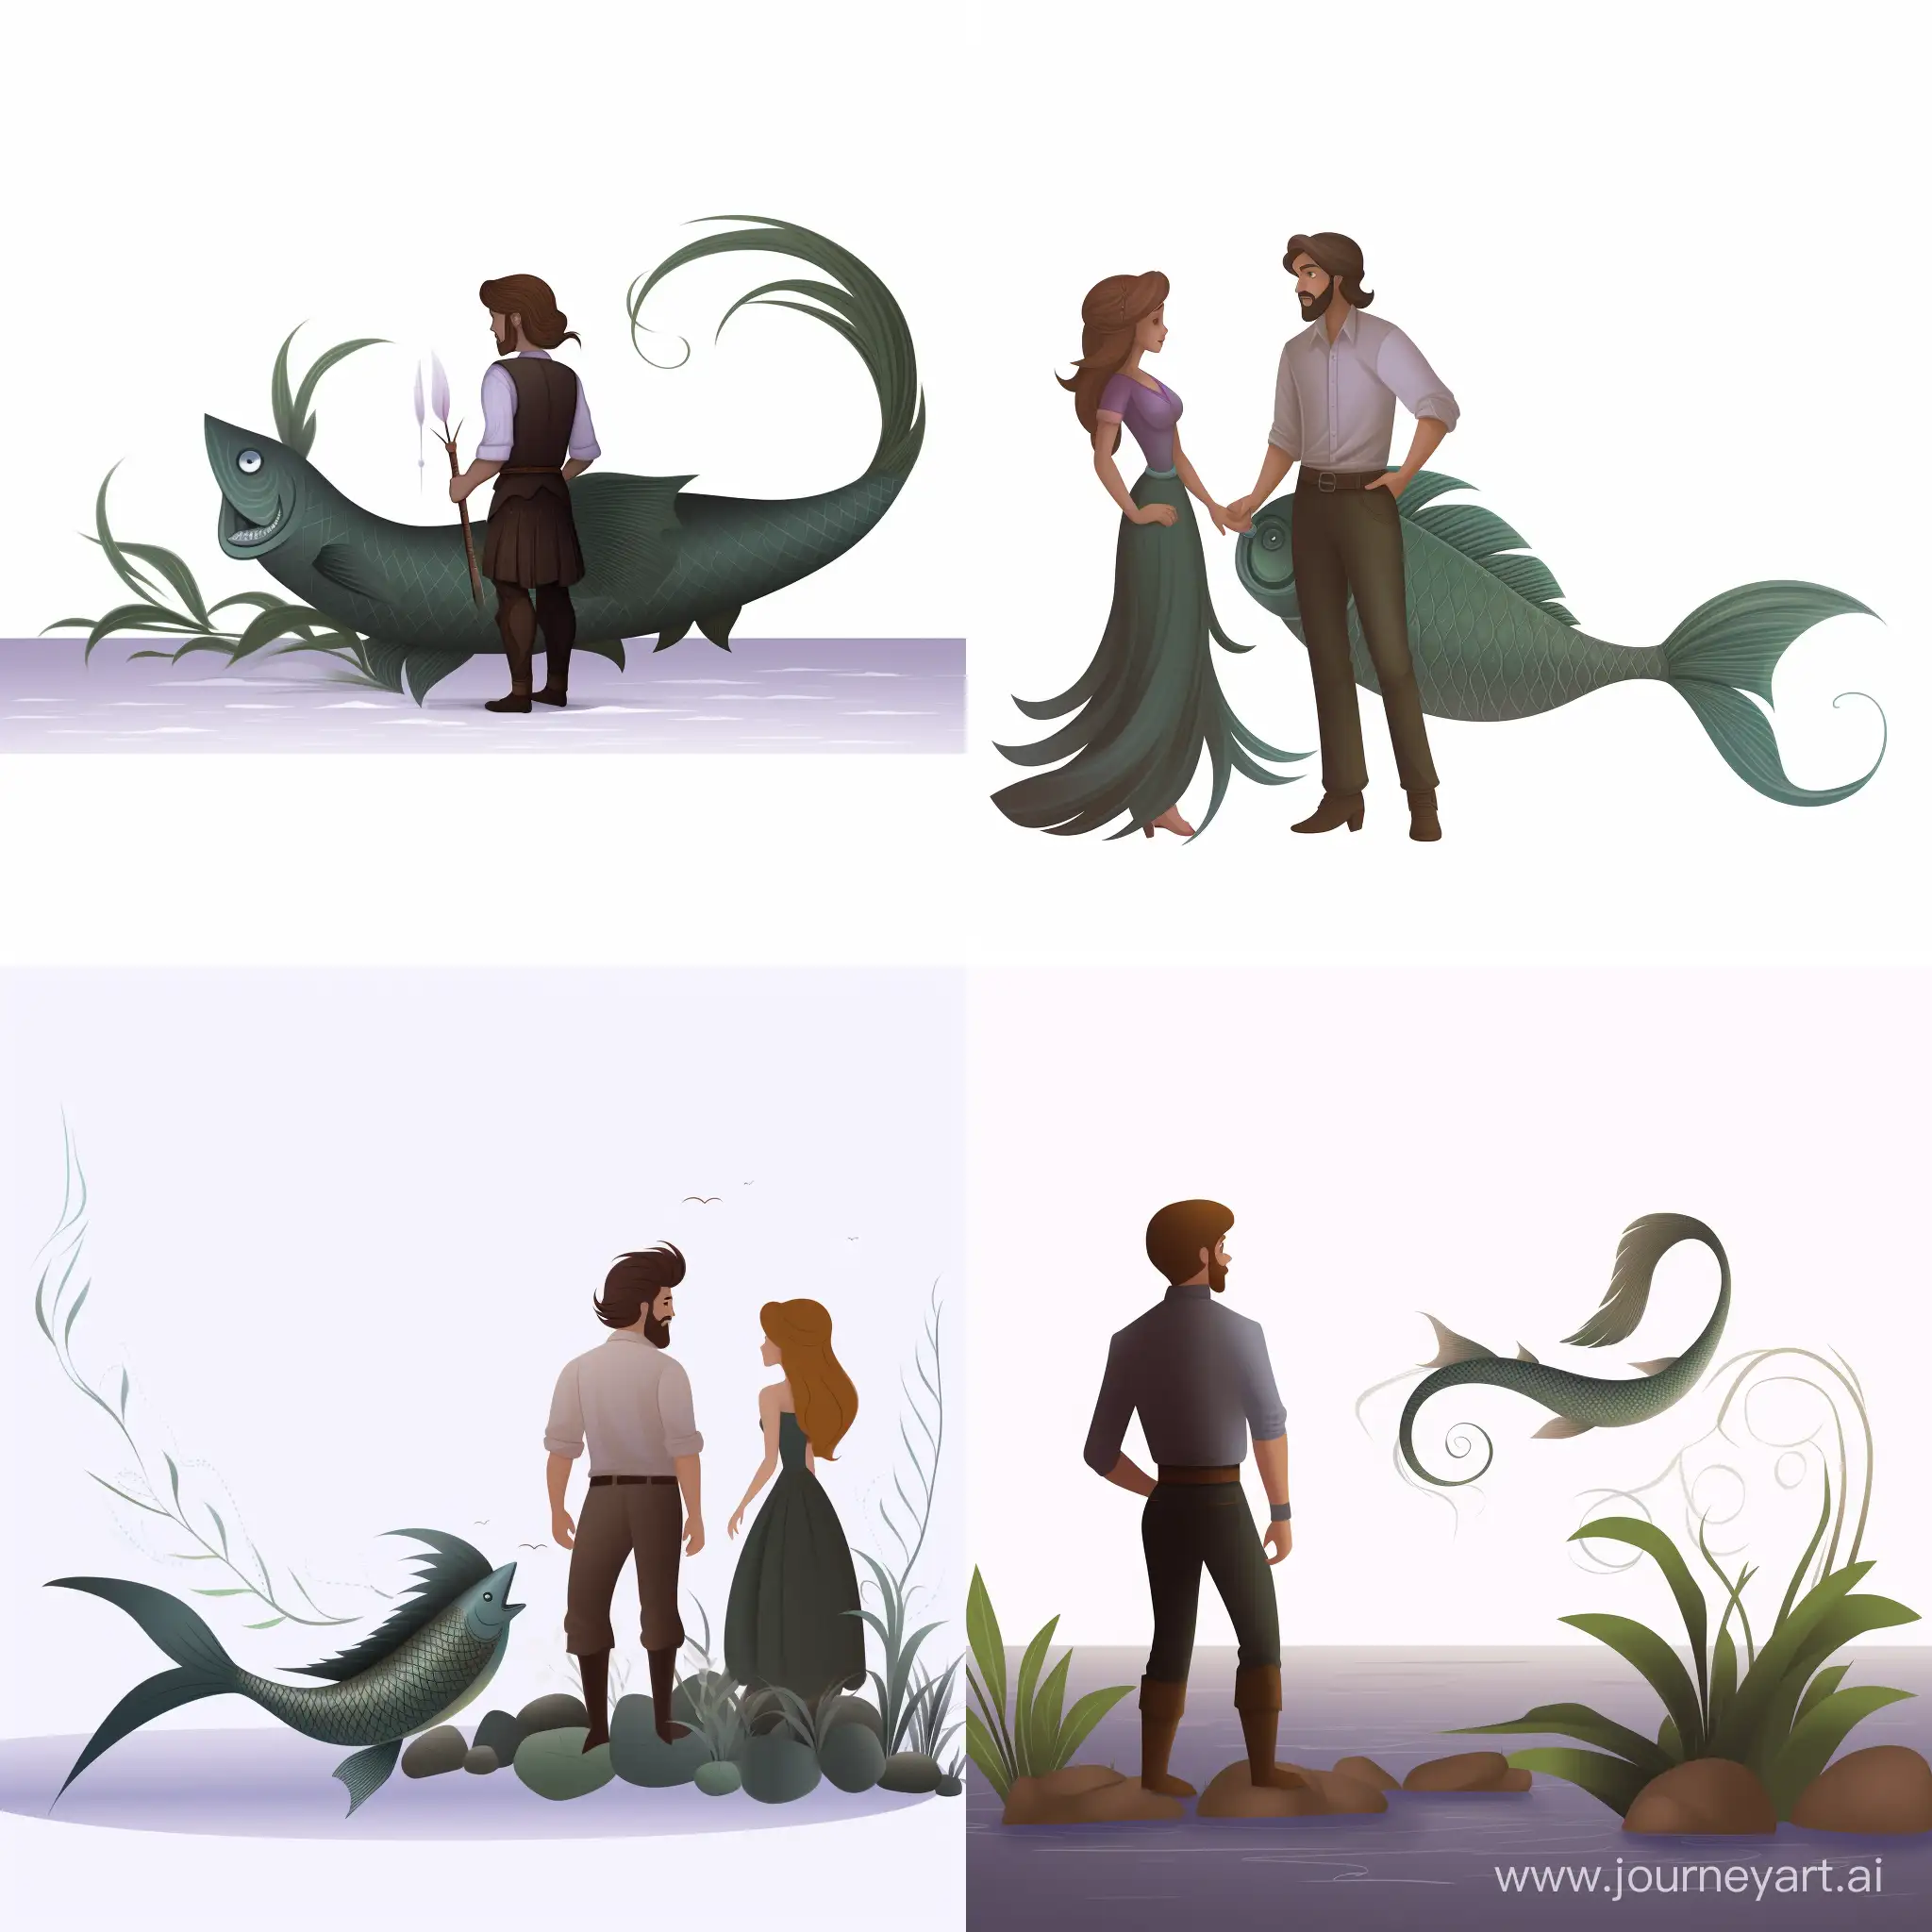 Beautiful adult mermaid with a fish tail talking to a small man with green skin, unkemptly dressed in a tattered shirt and pants with green leaves sticking out of them , on a white background, cartoon style